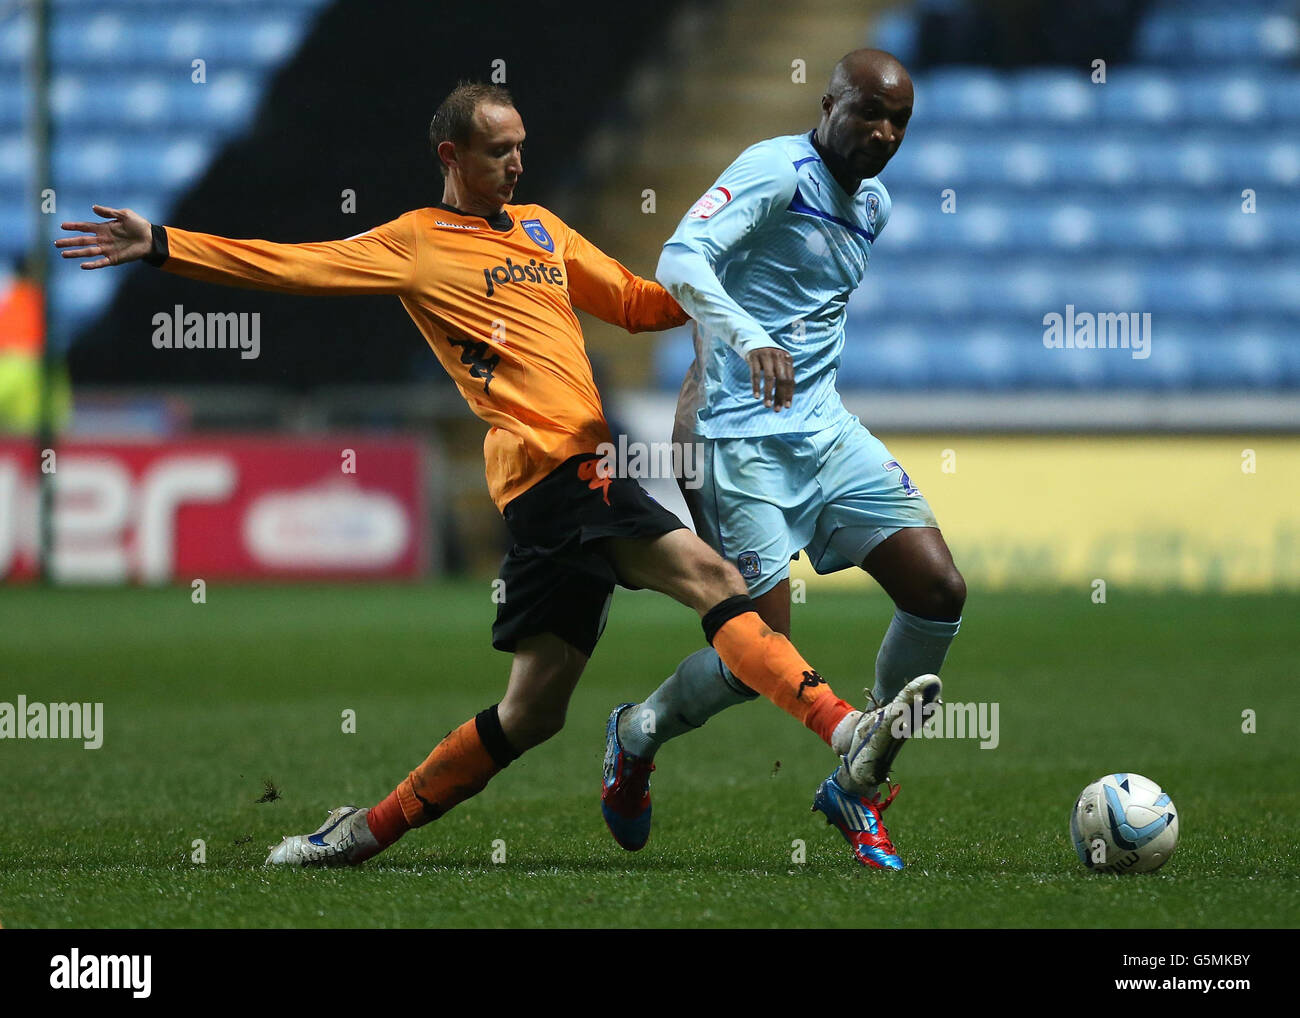 Coventry City's William Edjenguele and Portsmouth's Paul Benson during the npower Football League One match at the Ricoh Arena, Coventry. Stock Photo